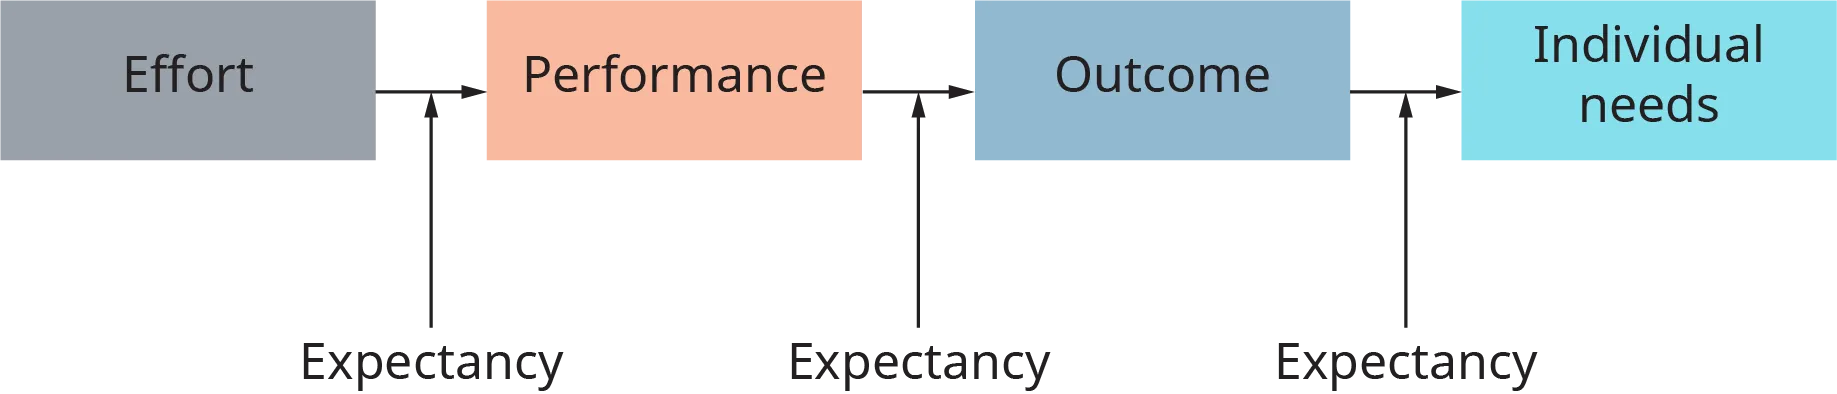 A process is shown as words connected by arrows. The diagram starts with the word effort, and an arrow points to performance. An arrow points from here to the word outcome. An arrow points from here to the words individual needs. Arrows labeled expectancy point to each of the arrows between words in the process.